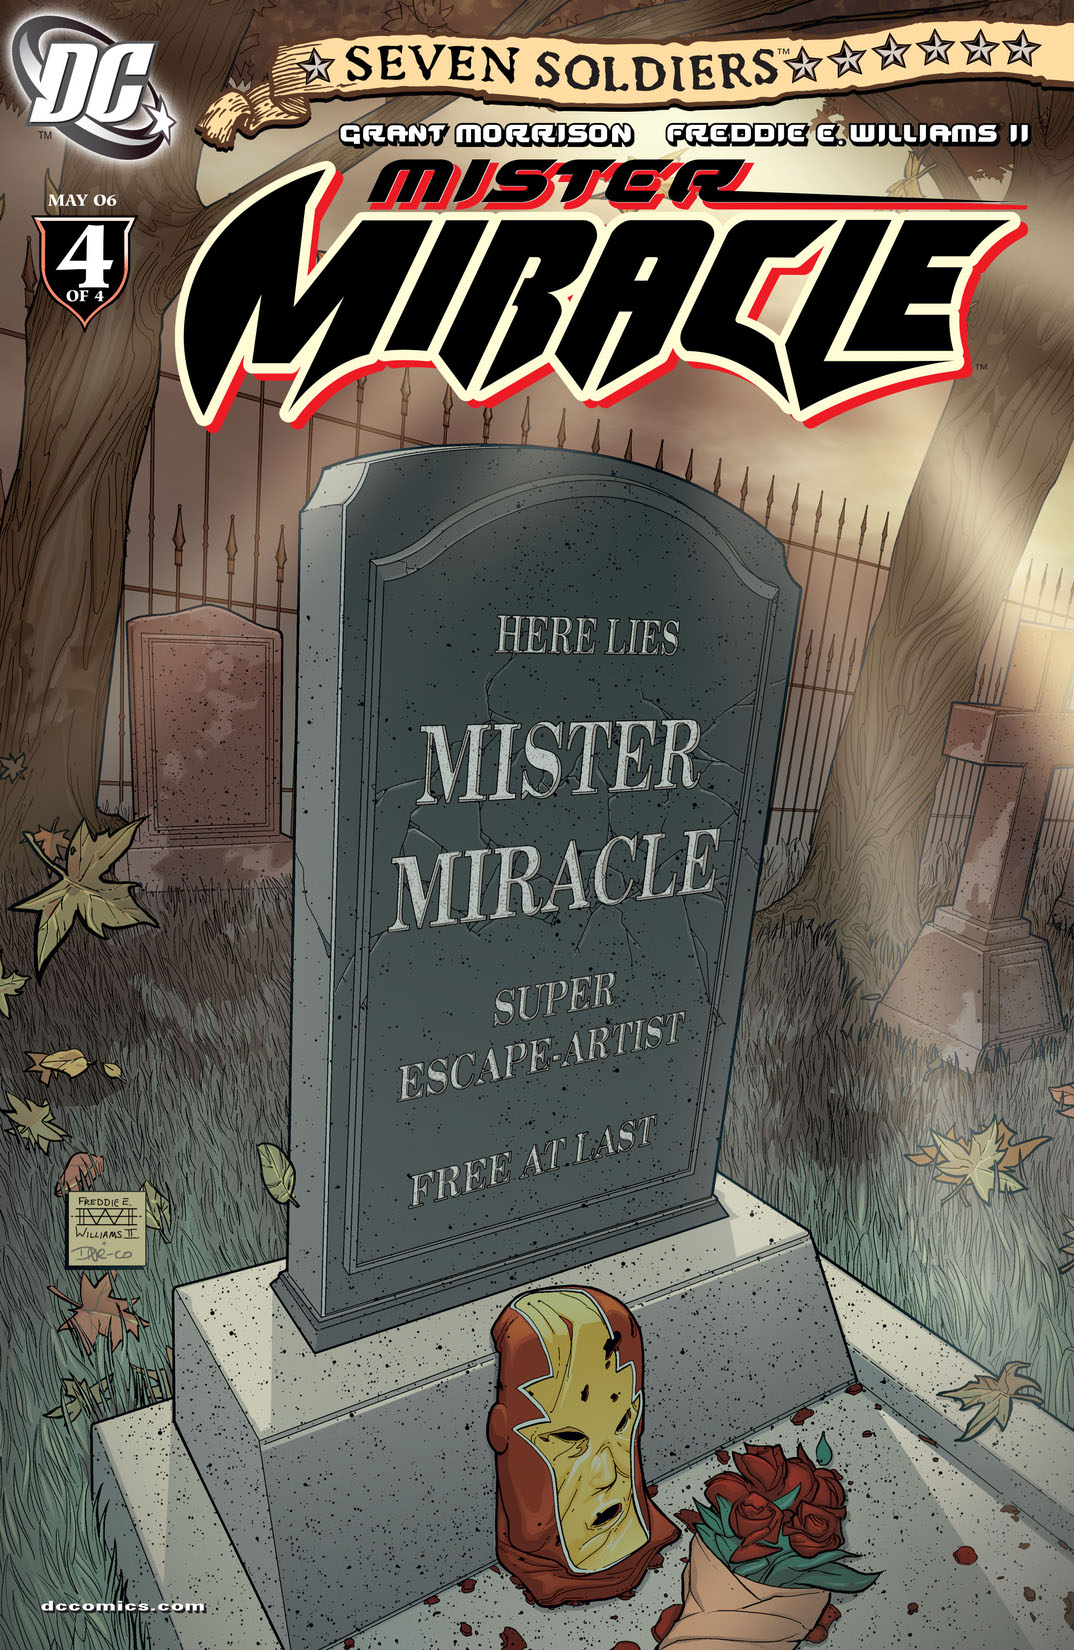 Seven Soldiers: Mister Miracle #4 preview images